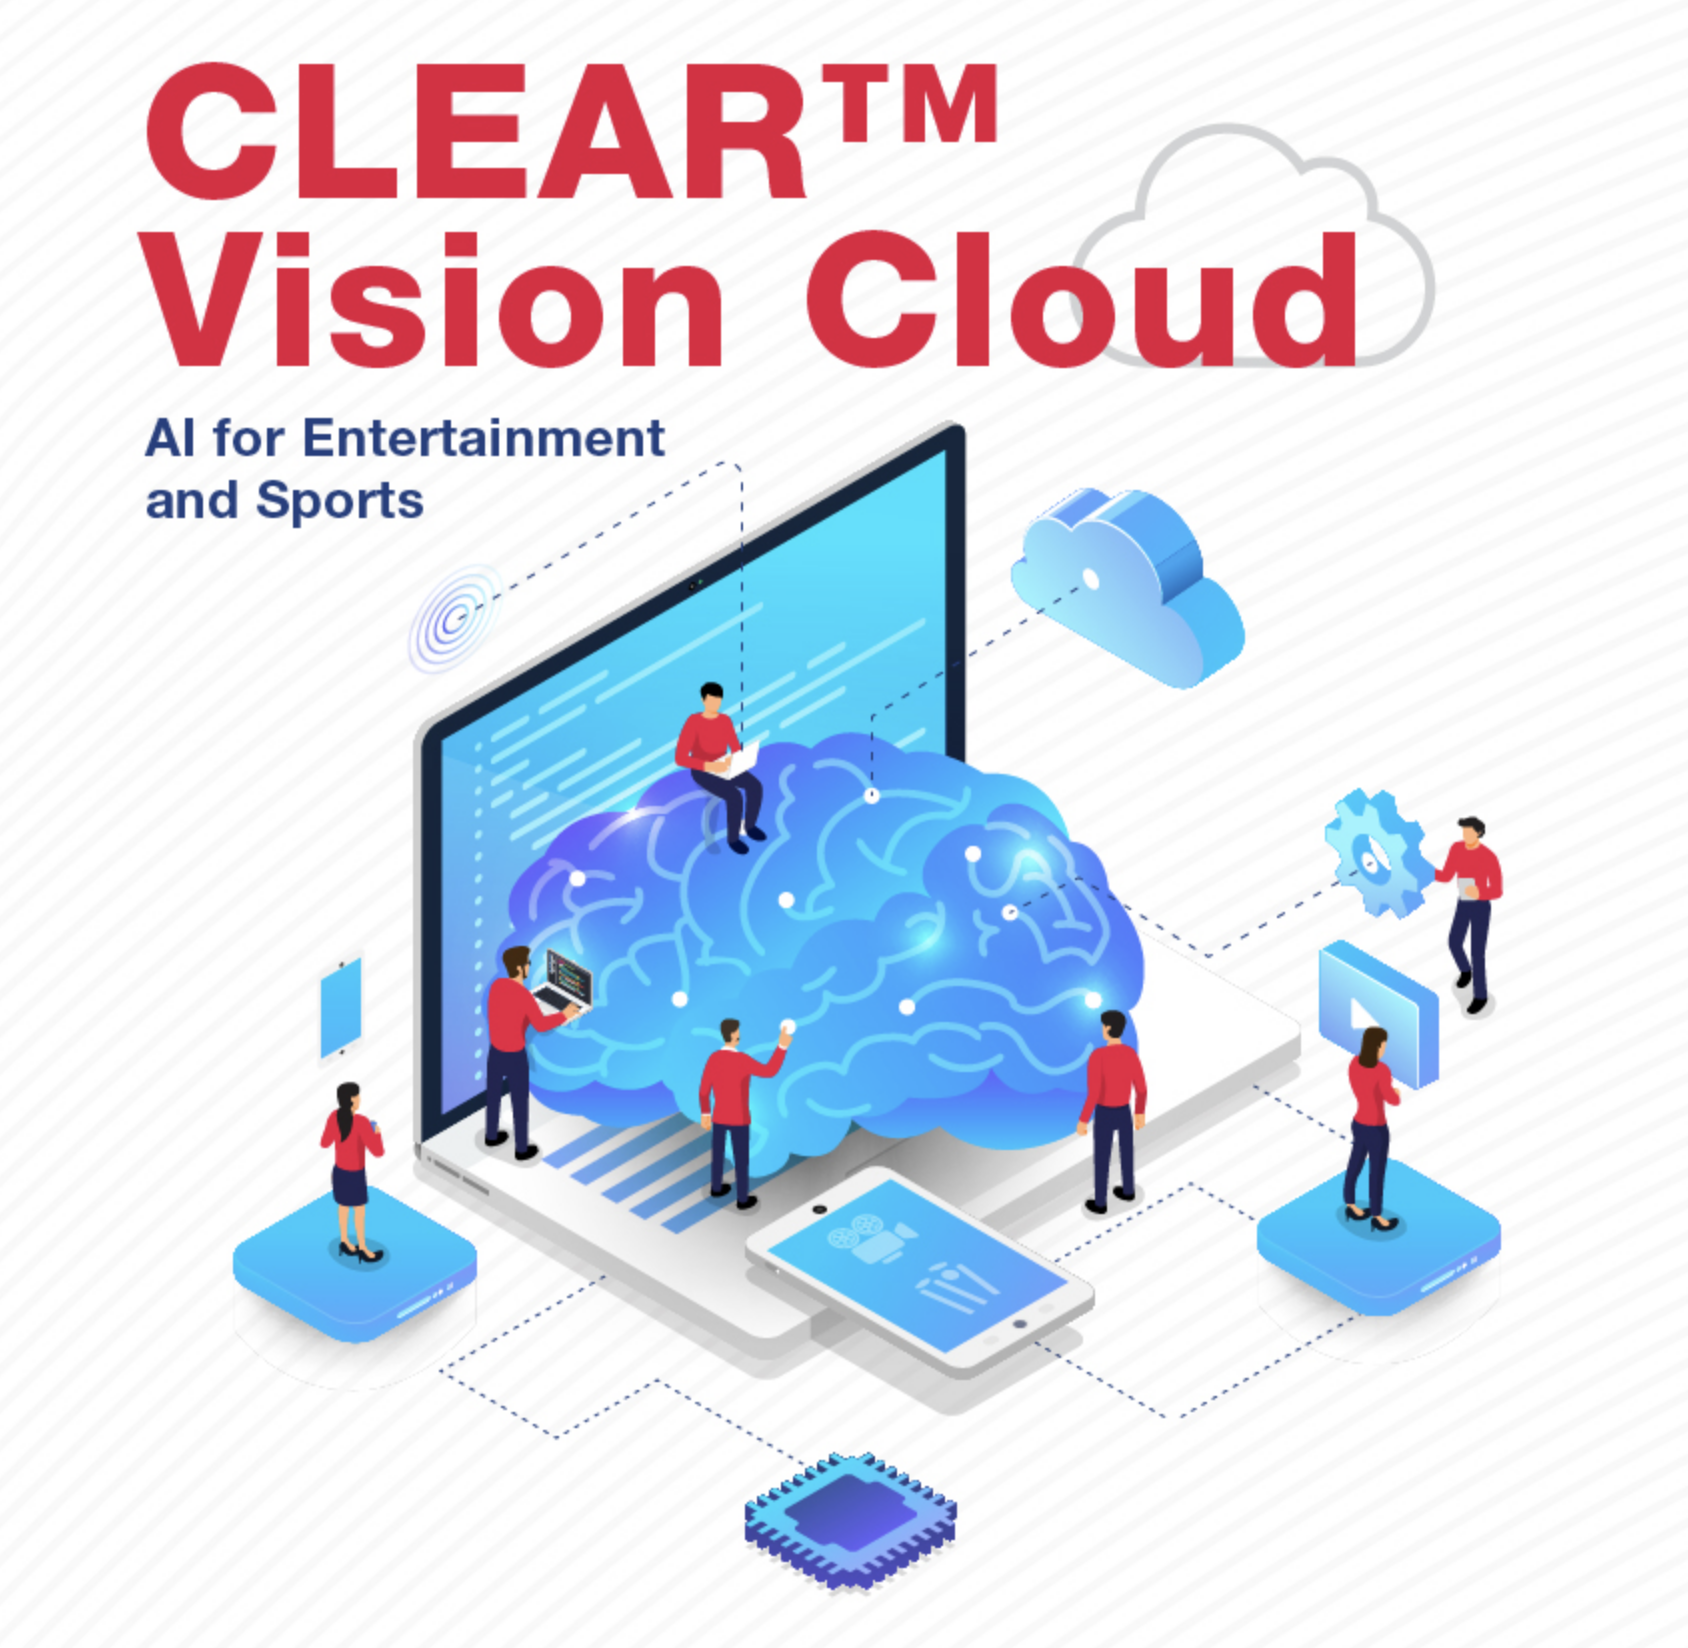 The Vision Cloud